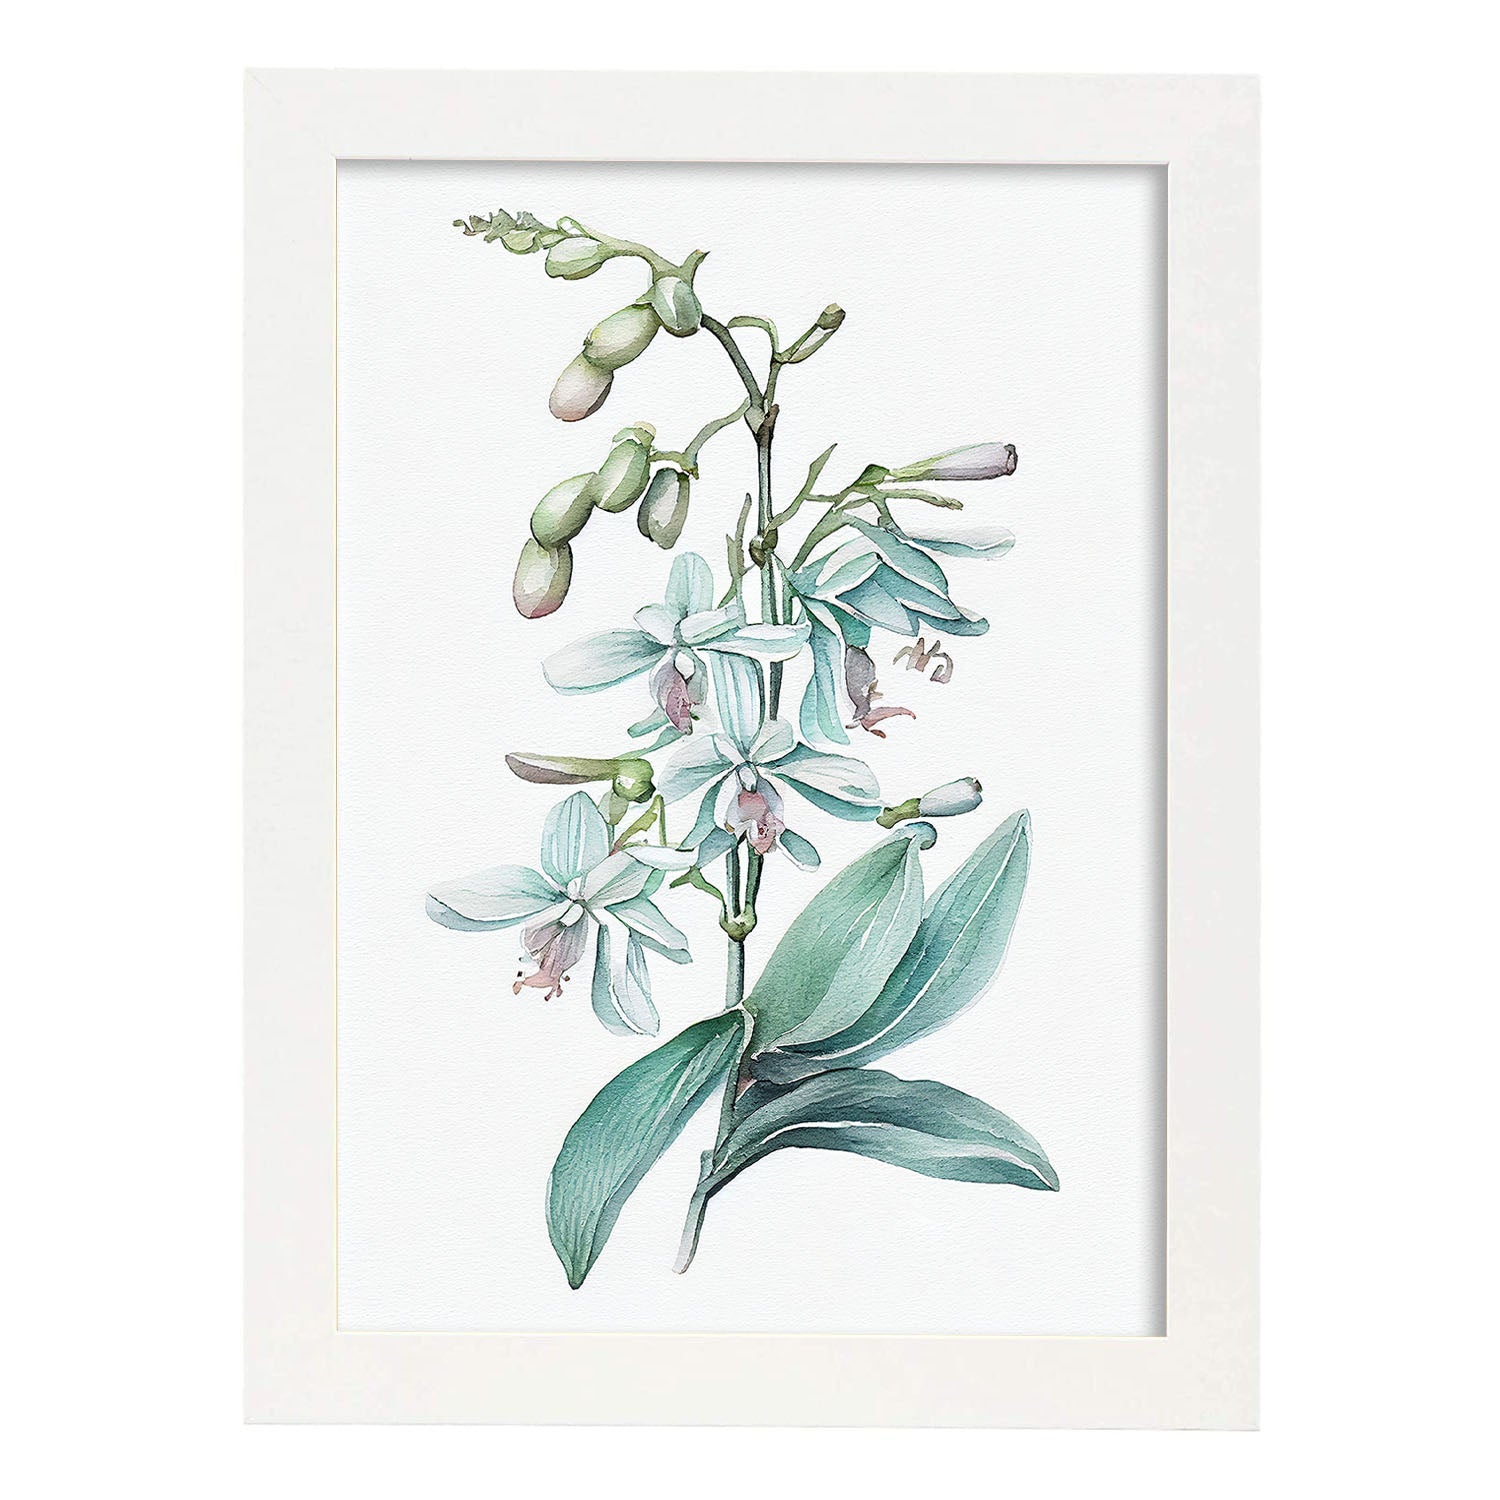 Nacnic watercolor minmal Orchid_2. Aesthetic Wall Art Prints for Bedroom or Living Room Design.-Artwork-Nacnic-A4-Marco Blanco-Nacnic Estudio SL